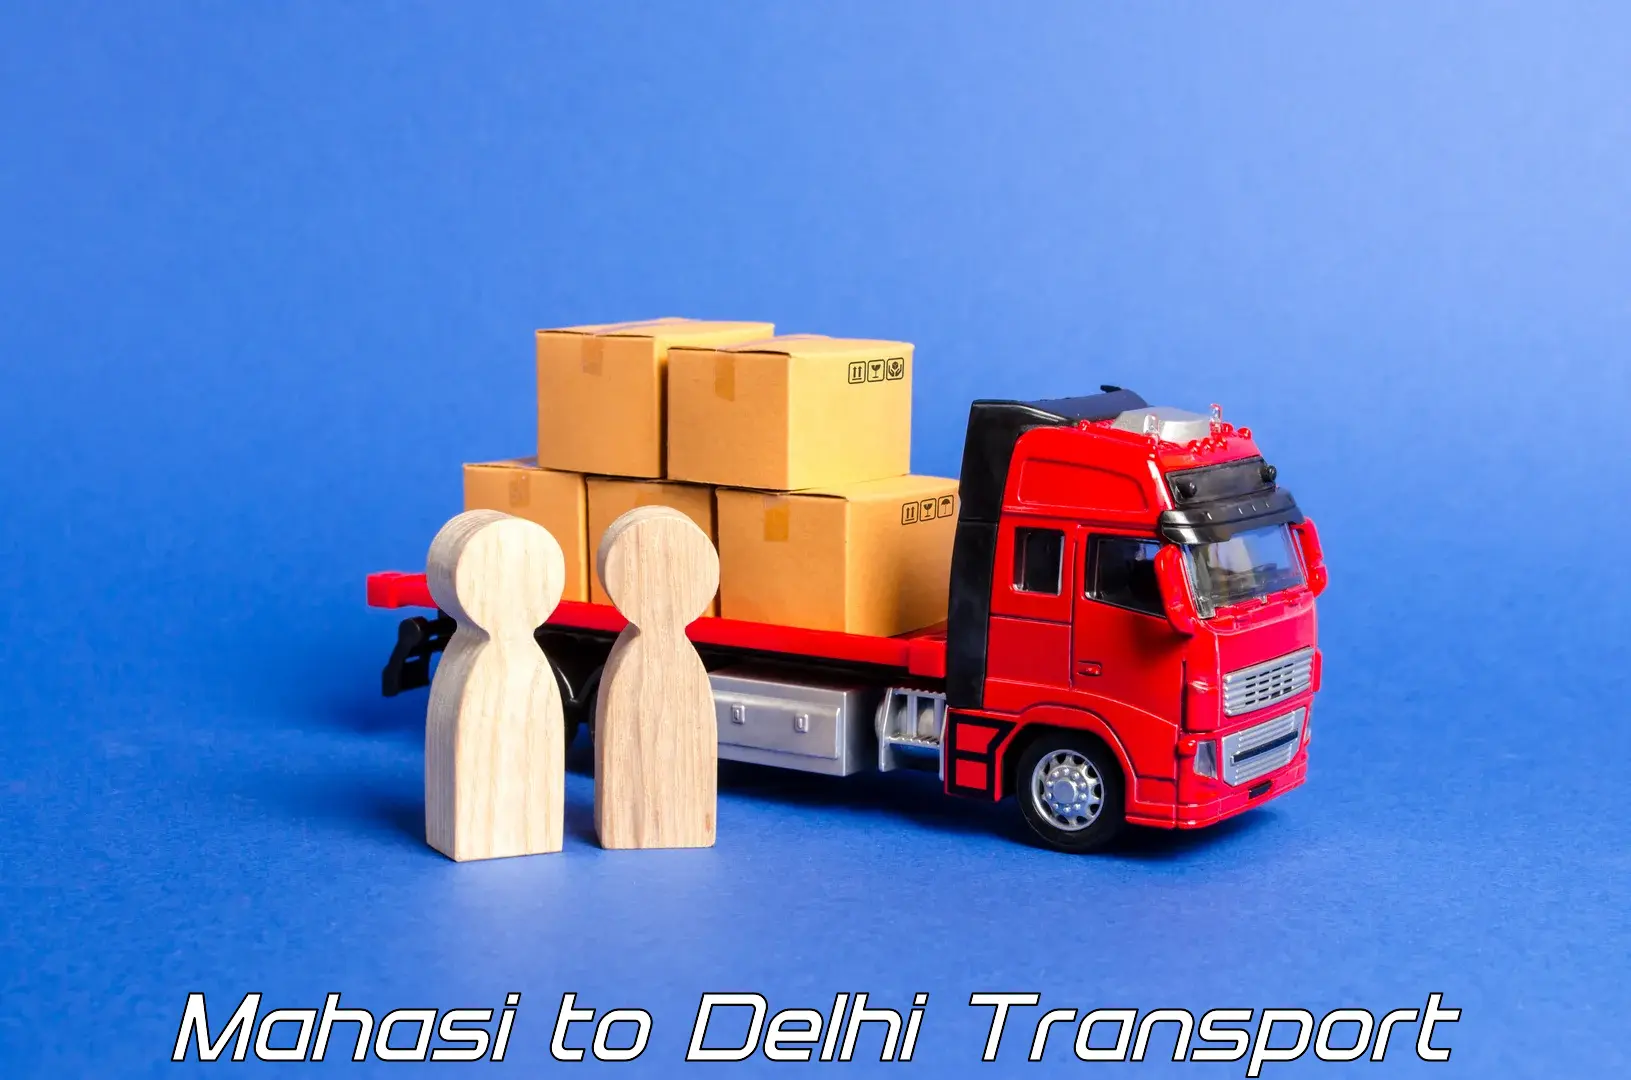 Container transportation services Mahasi to University of Delhi